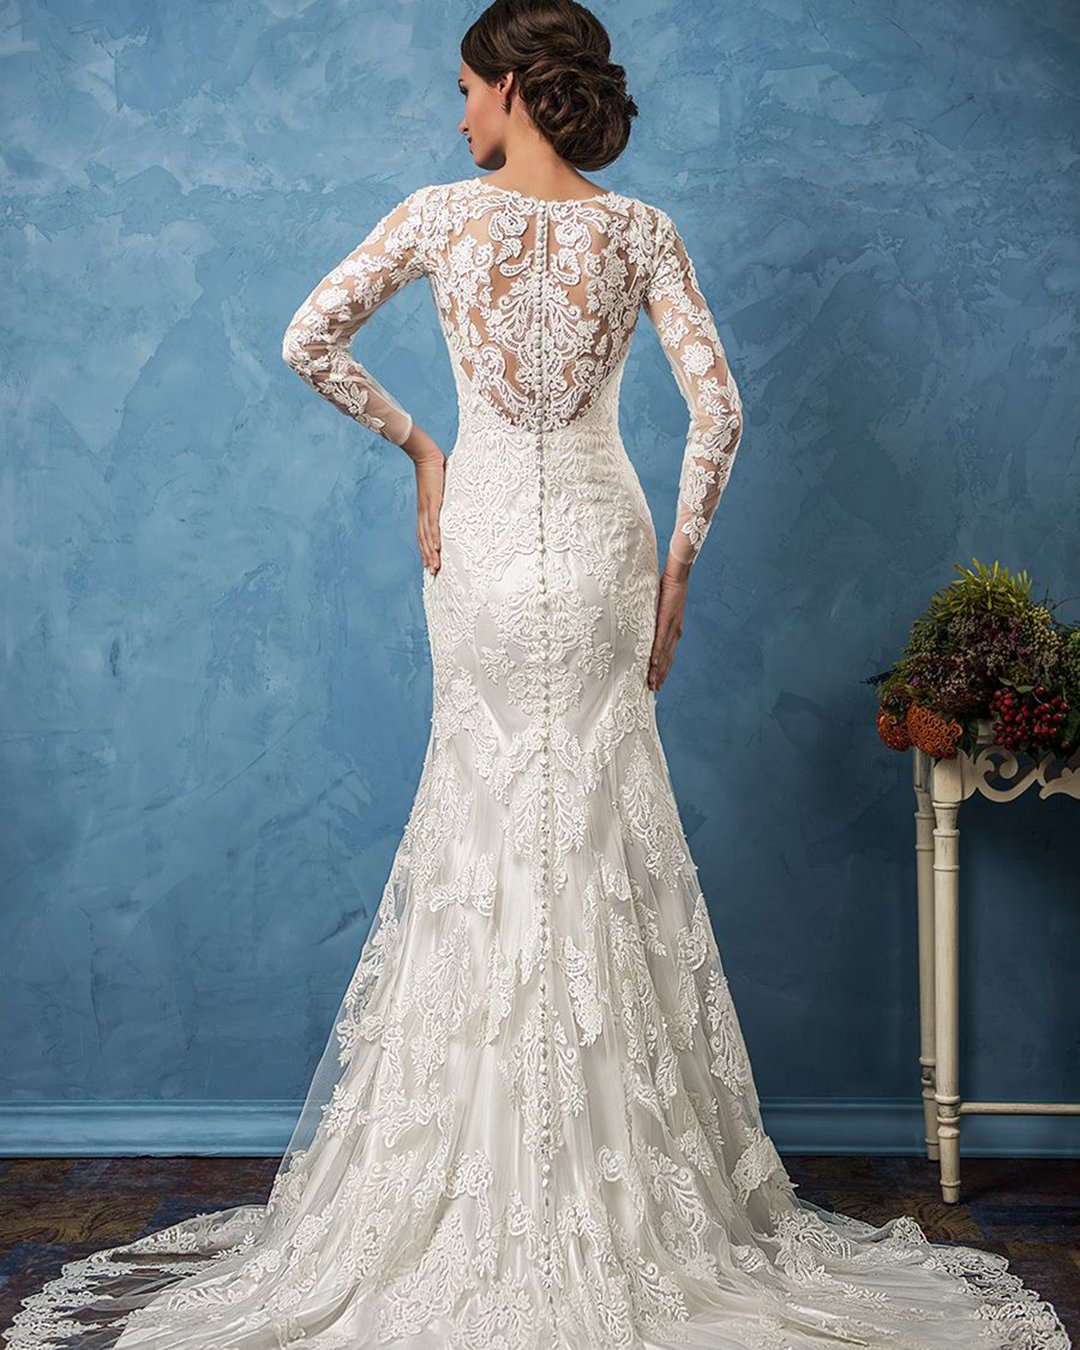 18 Fall Wedding Dresses With Charm